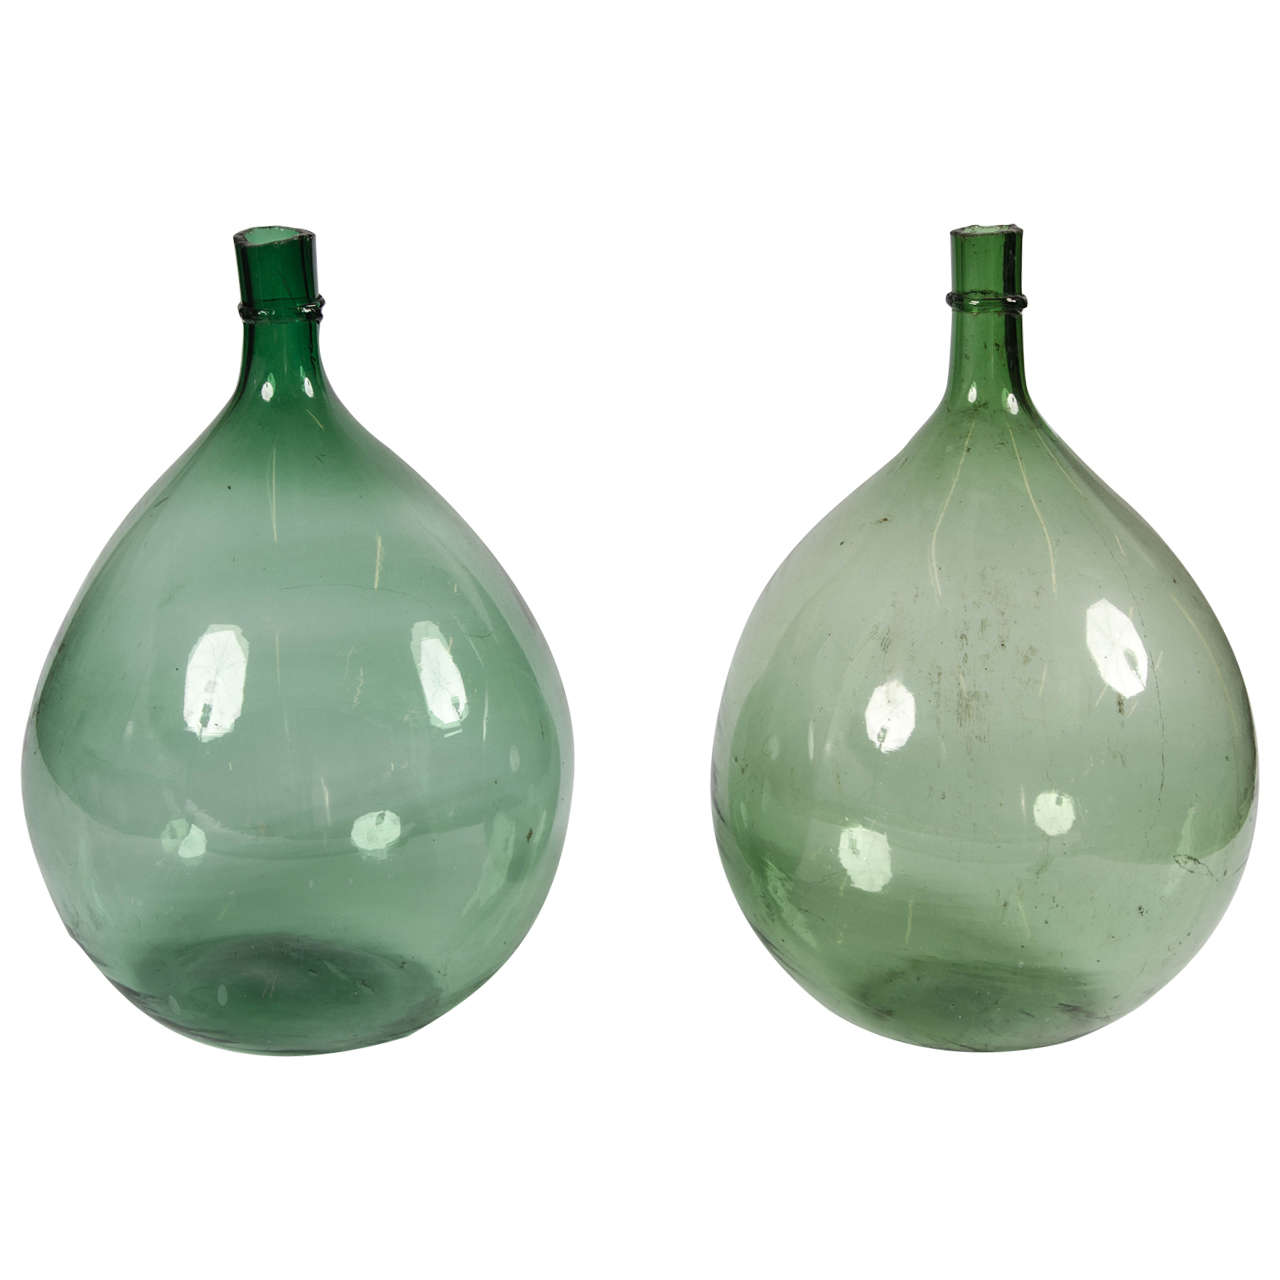 Pair of Late 18th Century Green Handblown Demijohns Glass Bottles  For Sale